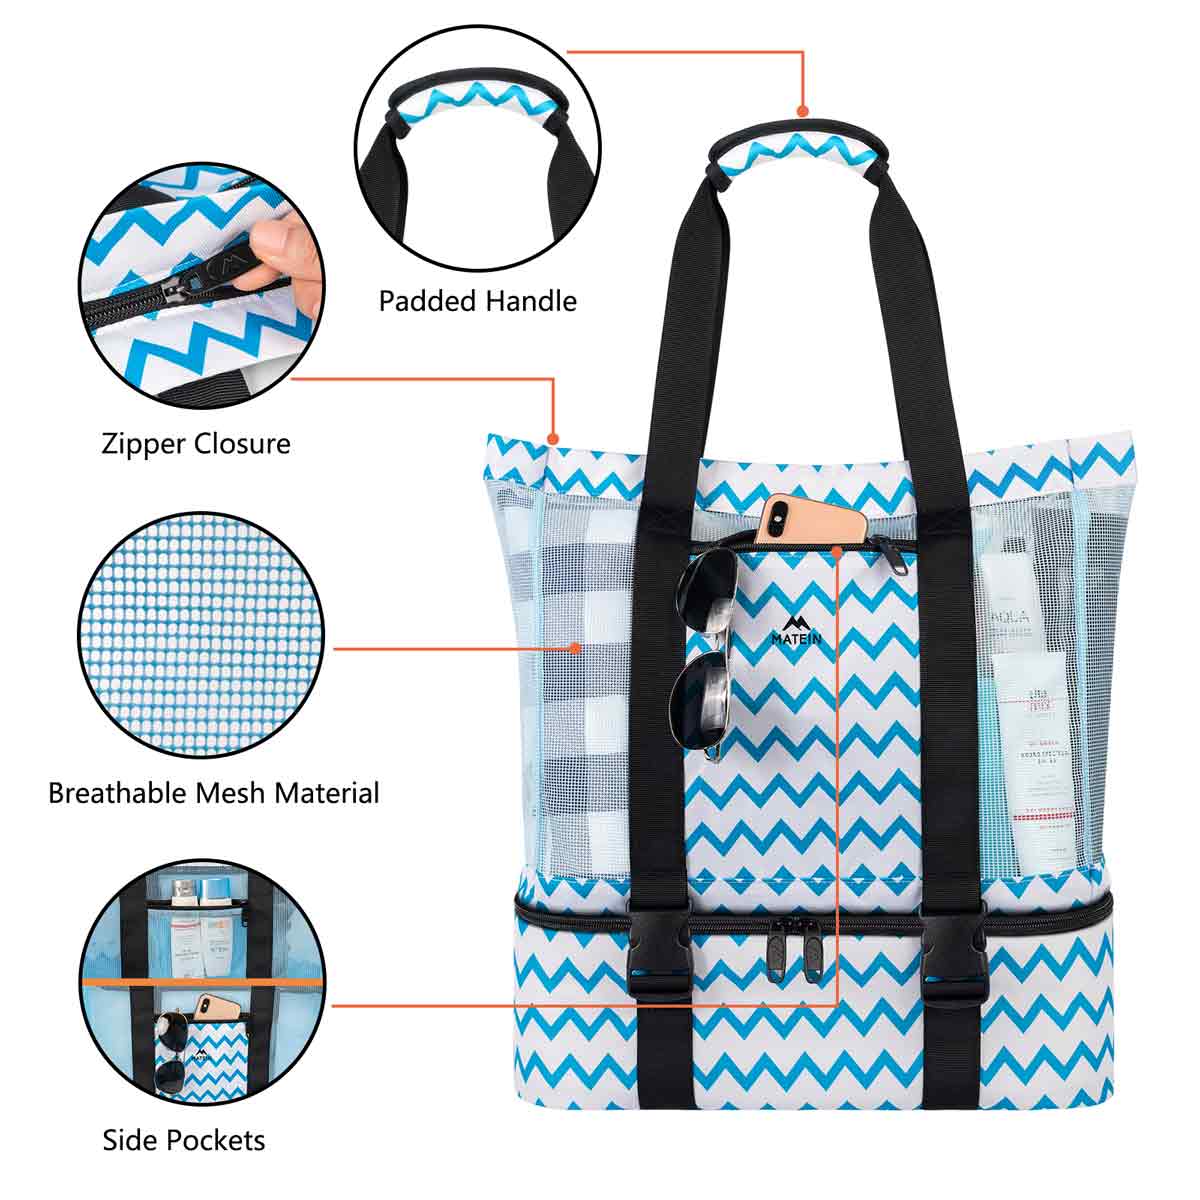 This Mesh Beach Bag Is on Sale at